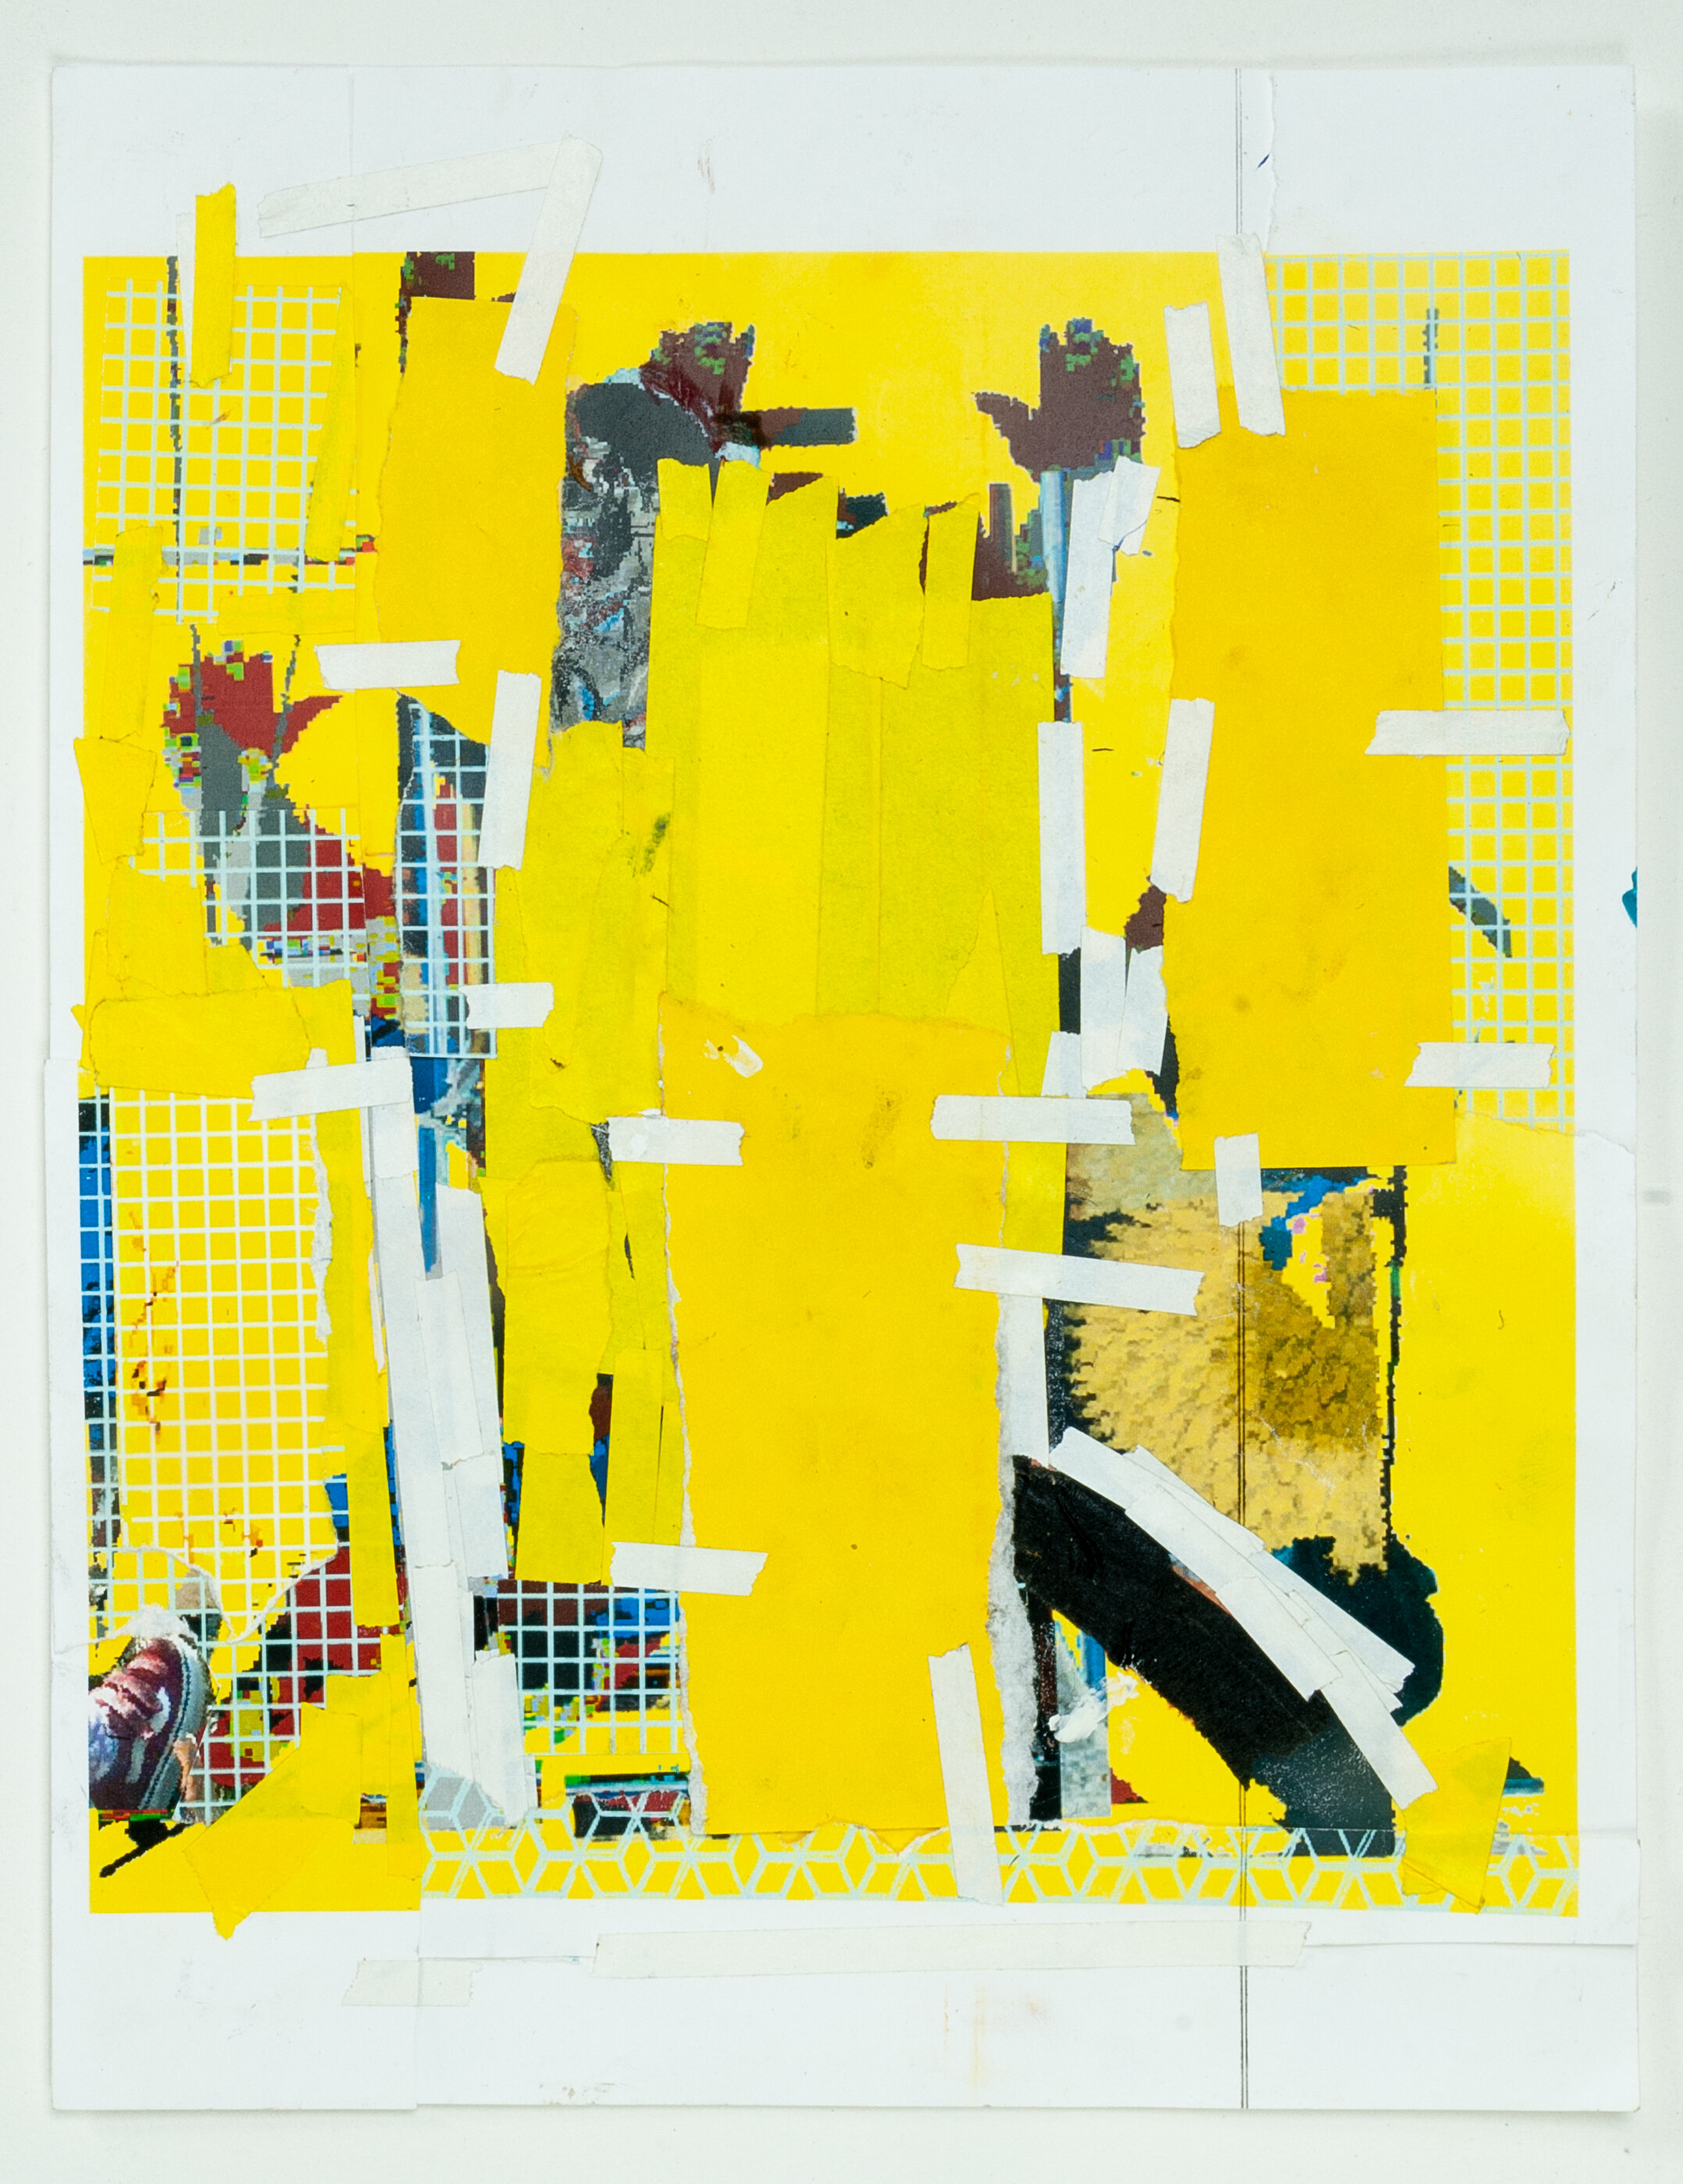   sm_wop2020_22 , 2020 collage and tape on paper, 11 x 8.5 in. private collection   